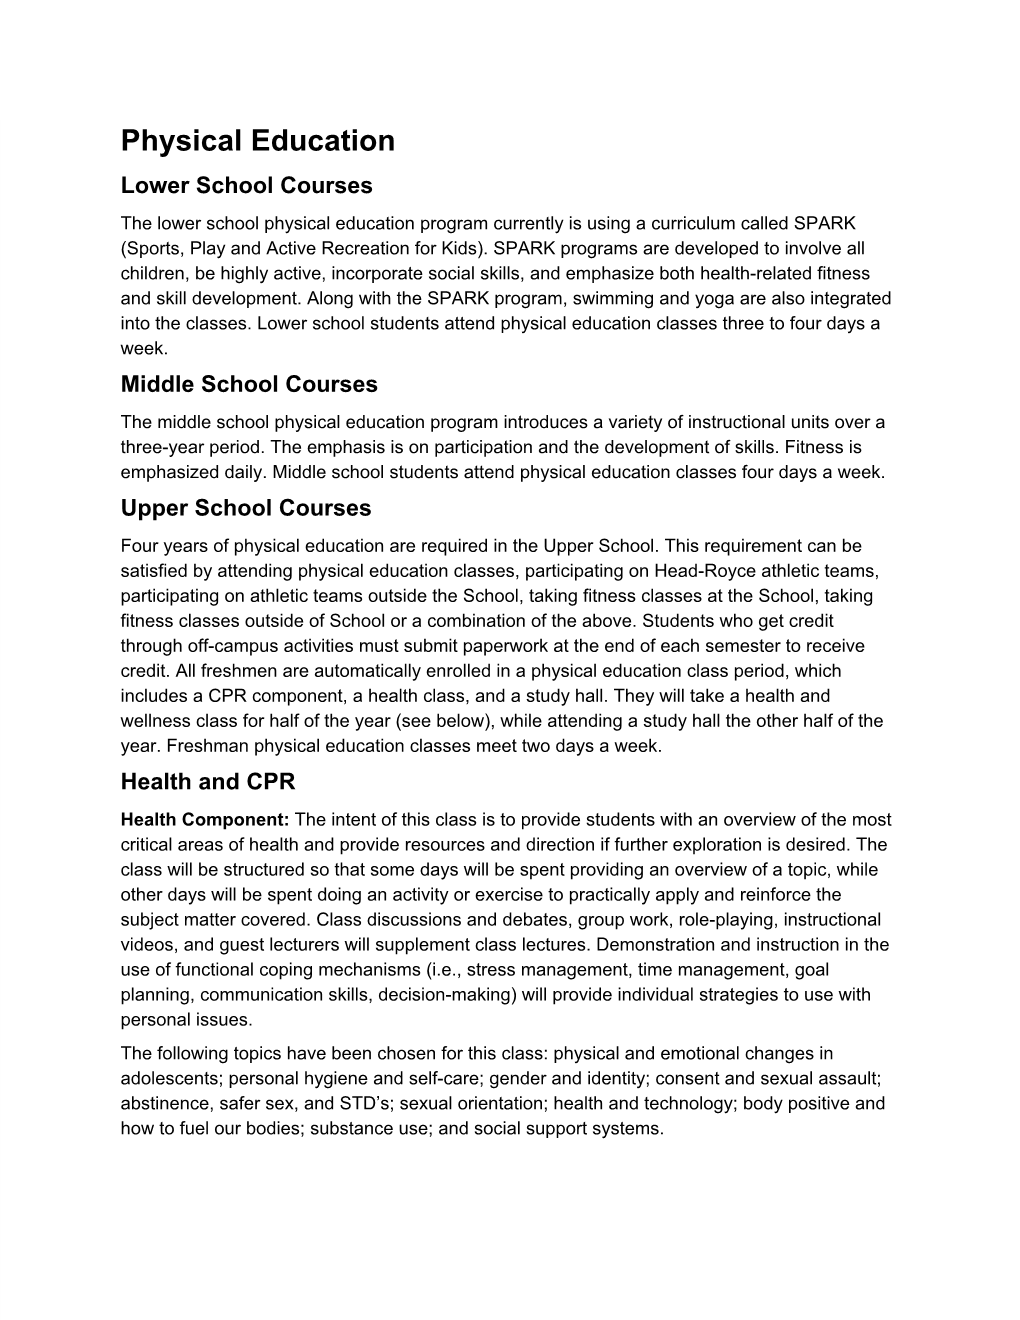 Physical Education Lower School Courses